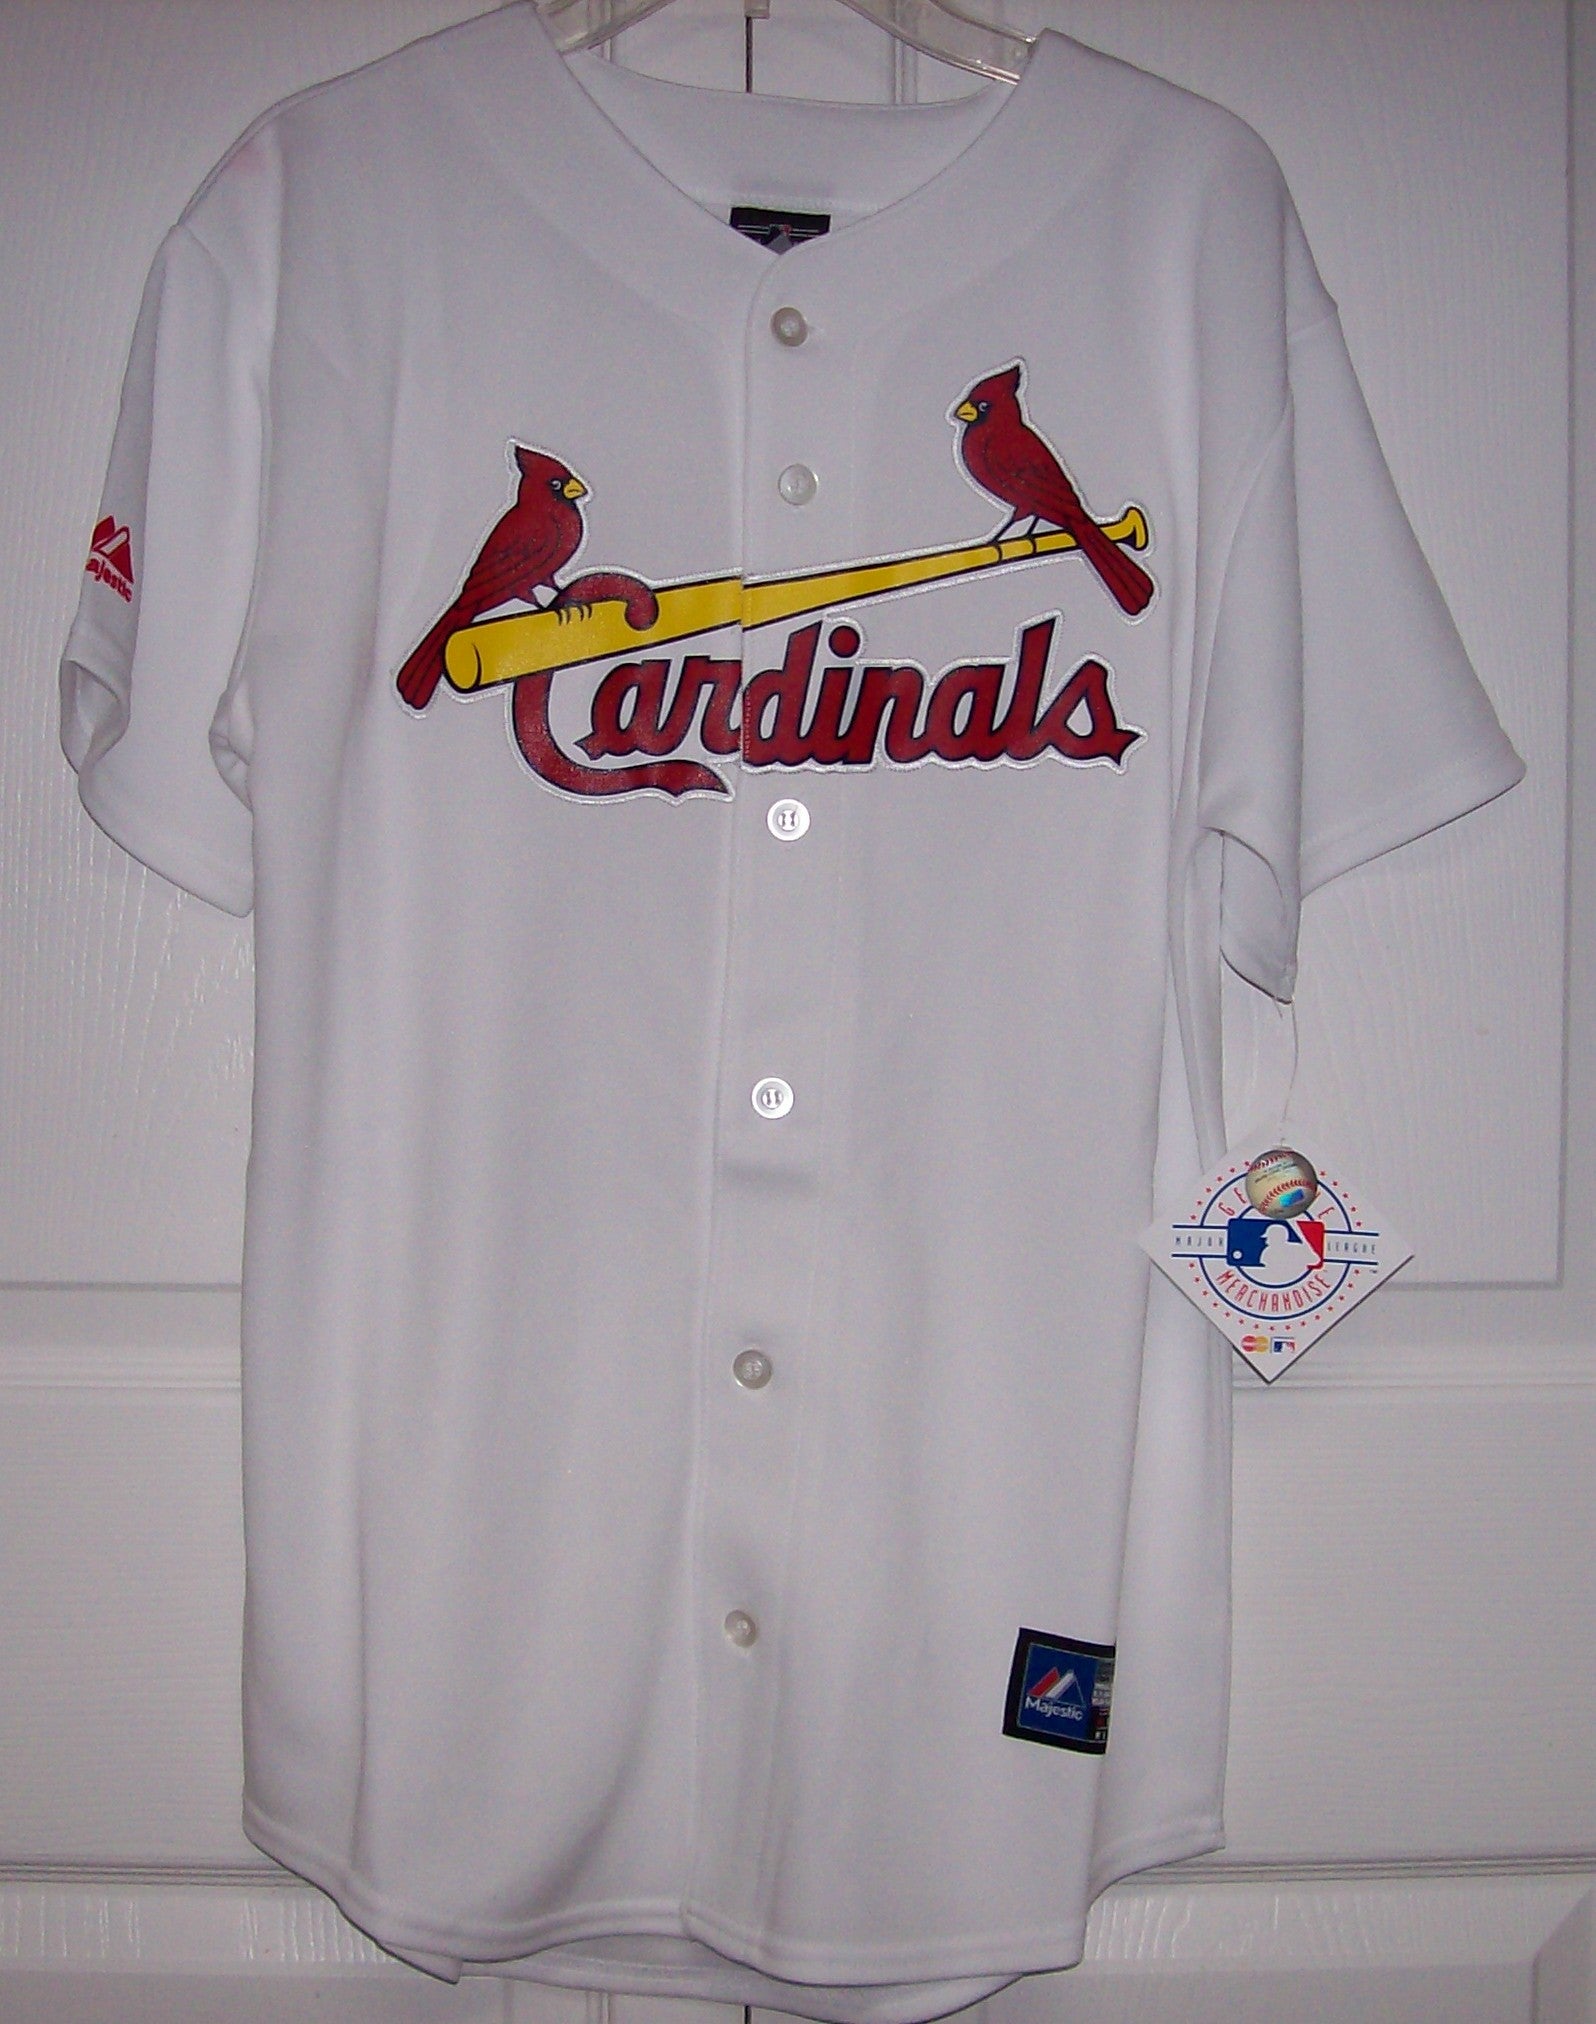 St. Louis Cardinals Kids Youth Size L 12/14 MLB Athletic T-Shirt